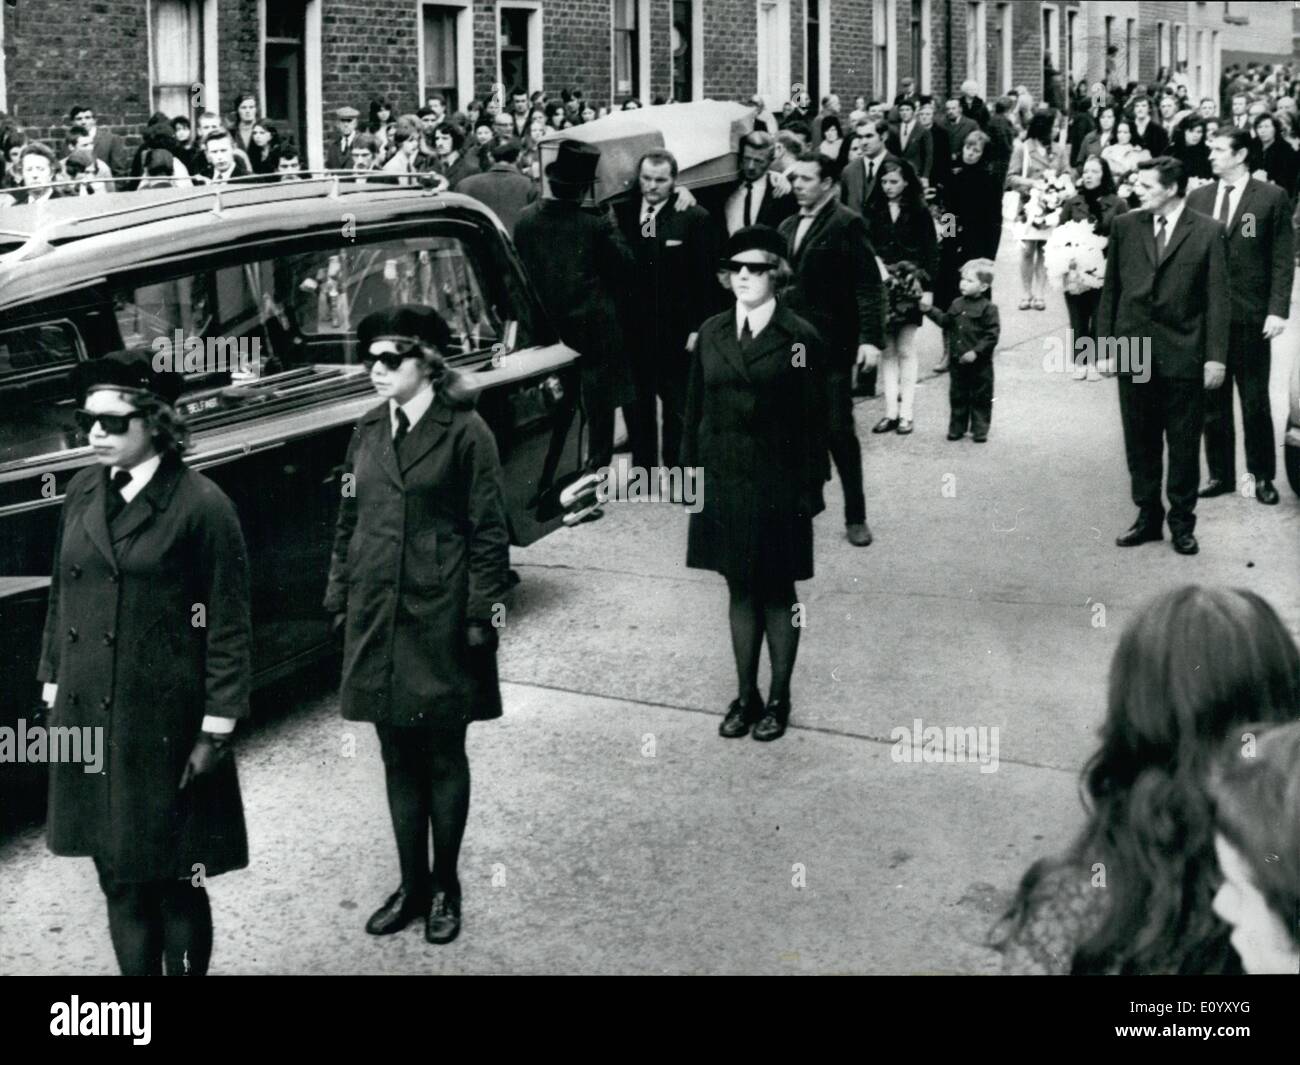 Oct. 10, 1971 - Funeral Of Shot Sisters In Belfast: In Belfast yesterday, teenage girls of the women's I R A, wearing black barets and dark glasses, slowmarched beside the Tricolour-draped coffins of two shot sisters, who were given a showpiece funeral. Nearly 10,000 Catholics lined the streets as the bodies of Miss Dorothy Maguire, 19, and Mrs Mary Mechan, 30, a mother of four, were carried to the traditional Republican plot at the city's Milltown cemetery. They were shot in a car by troops at the weekend. The Army said shots were fired at troops from the back window of the vehicle Stock Photo